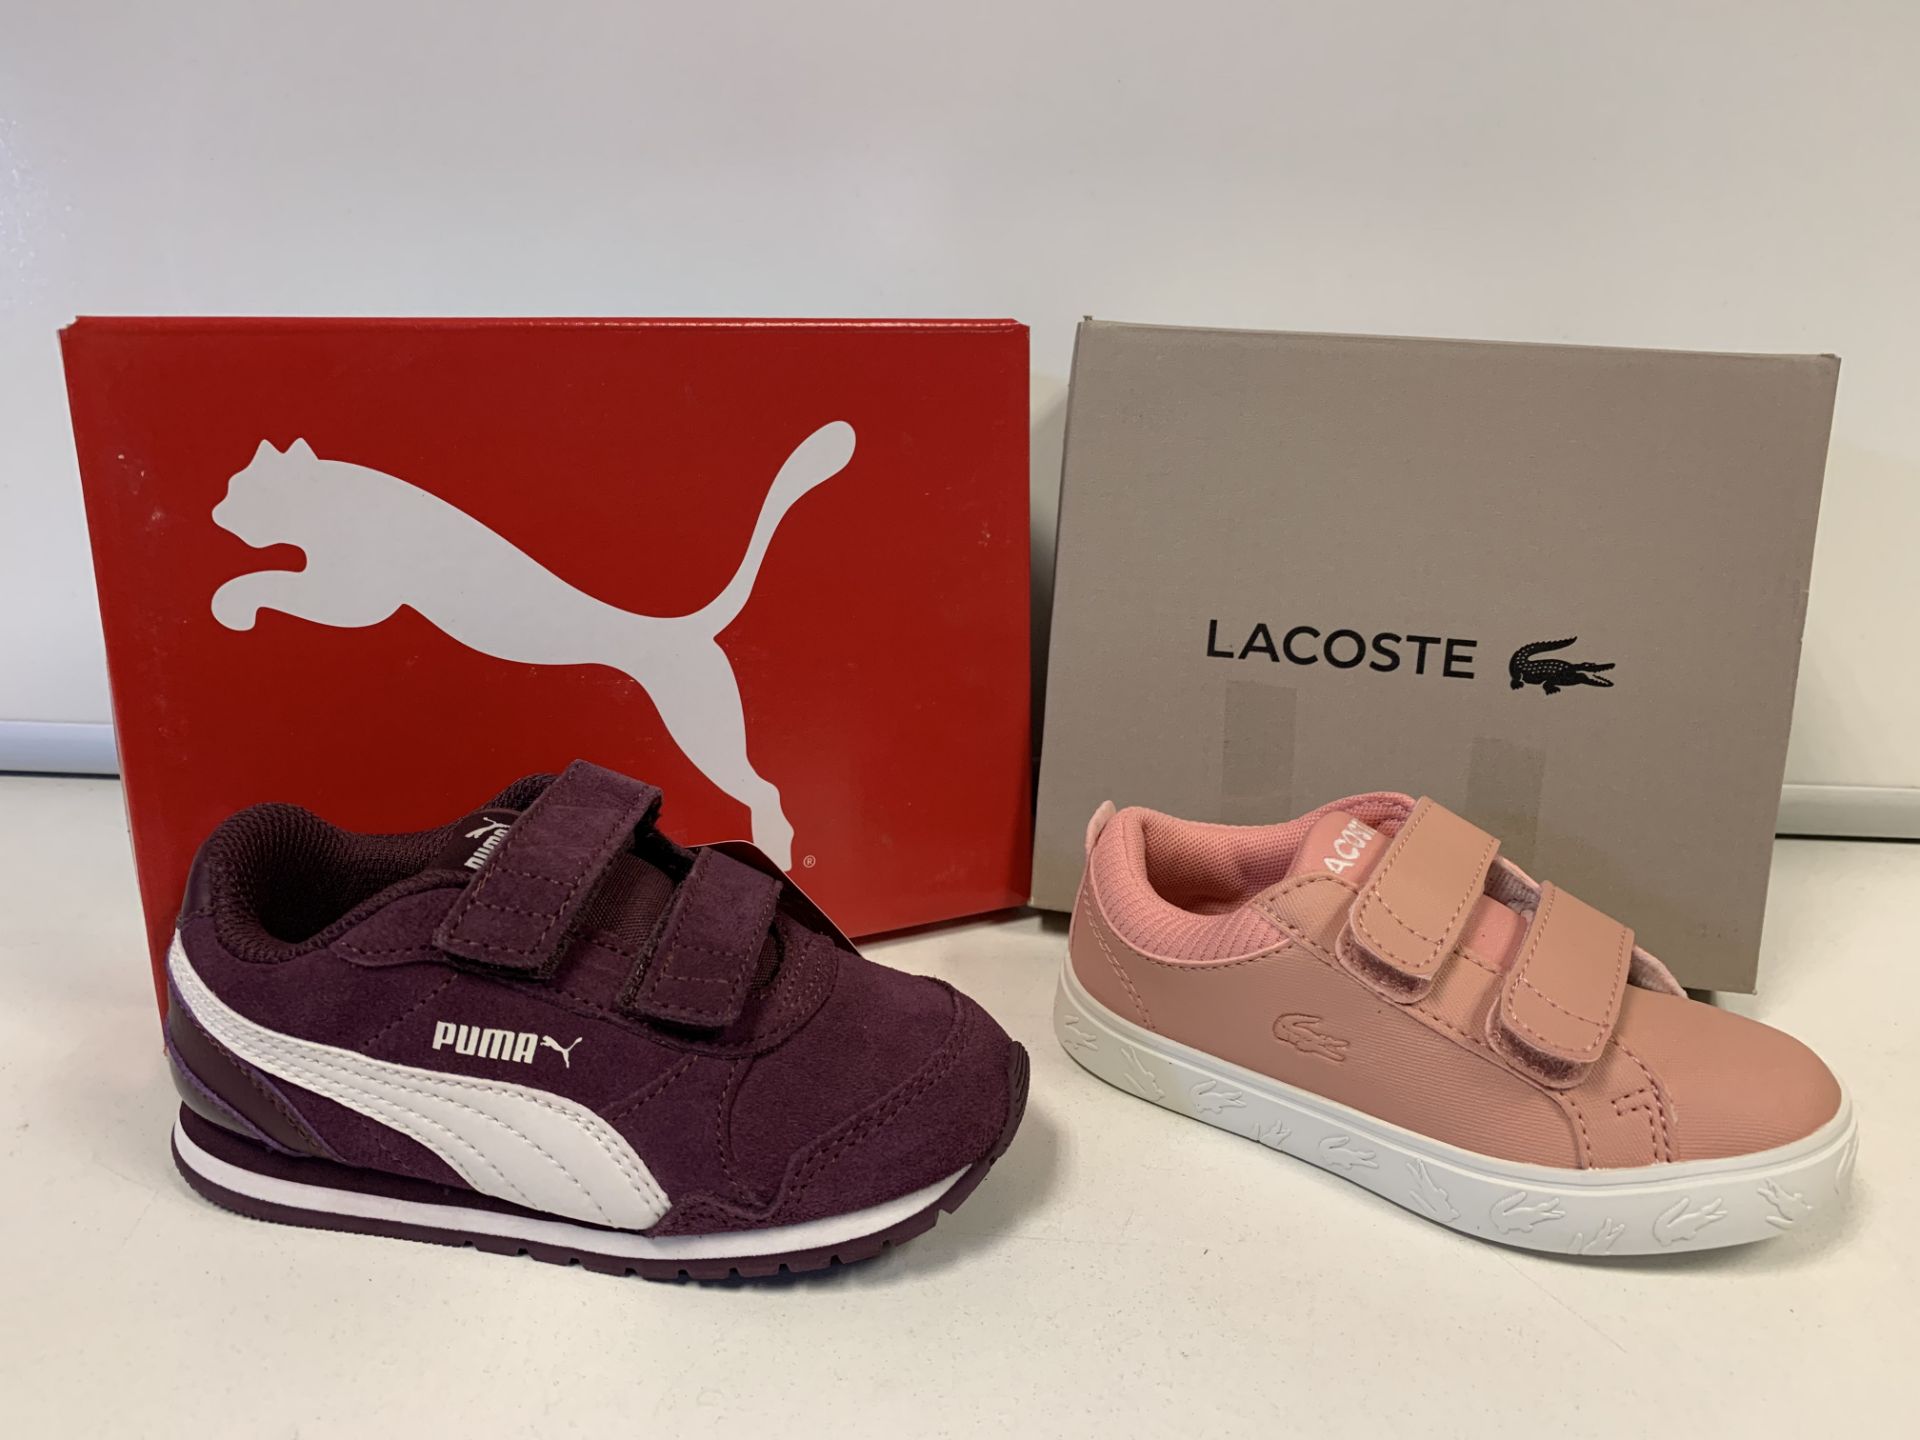 (NO VAT) 2 X BRAND NEW LACOSTE PINK TRAINERS SIZE I7 AND 2 X BRAND NEW 2 X BRAND NEW PUMA TRAINERS